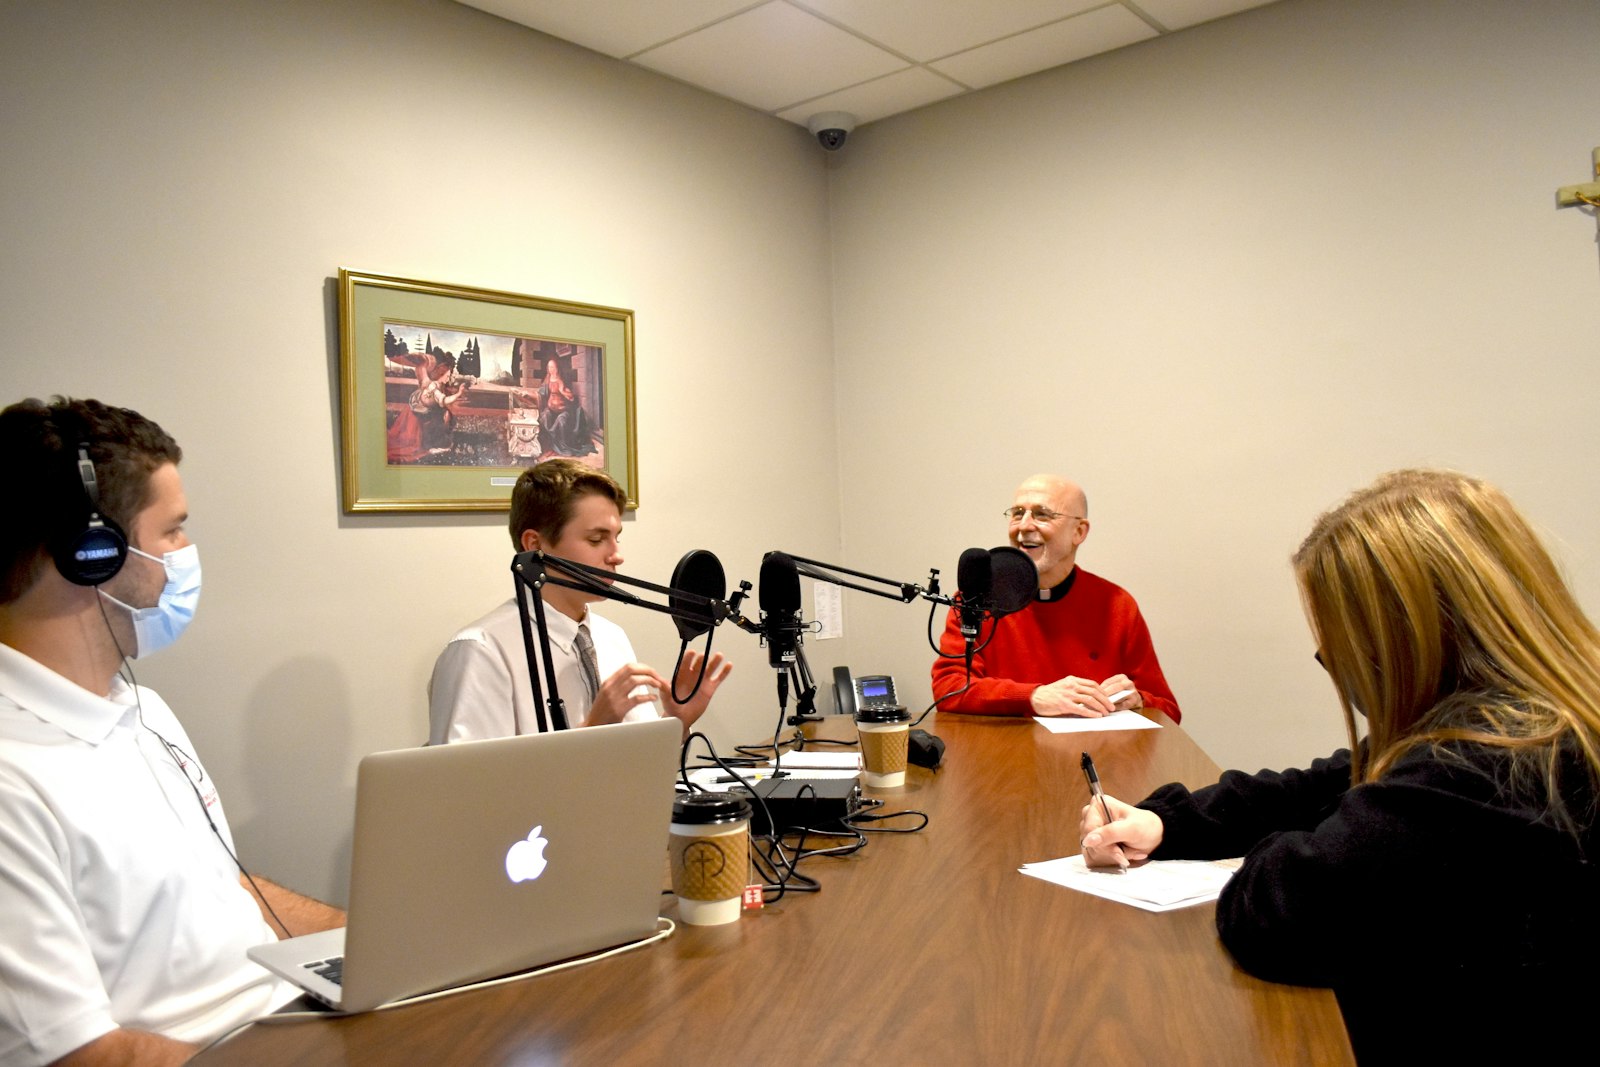 Involving students in the creation, execution and research for the podcast encourages them to own their faith, said Divine Child campus minister John Brahier.